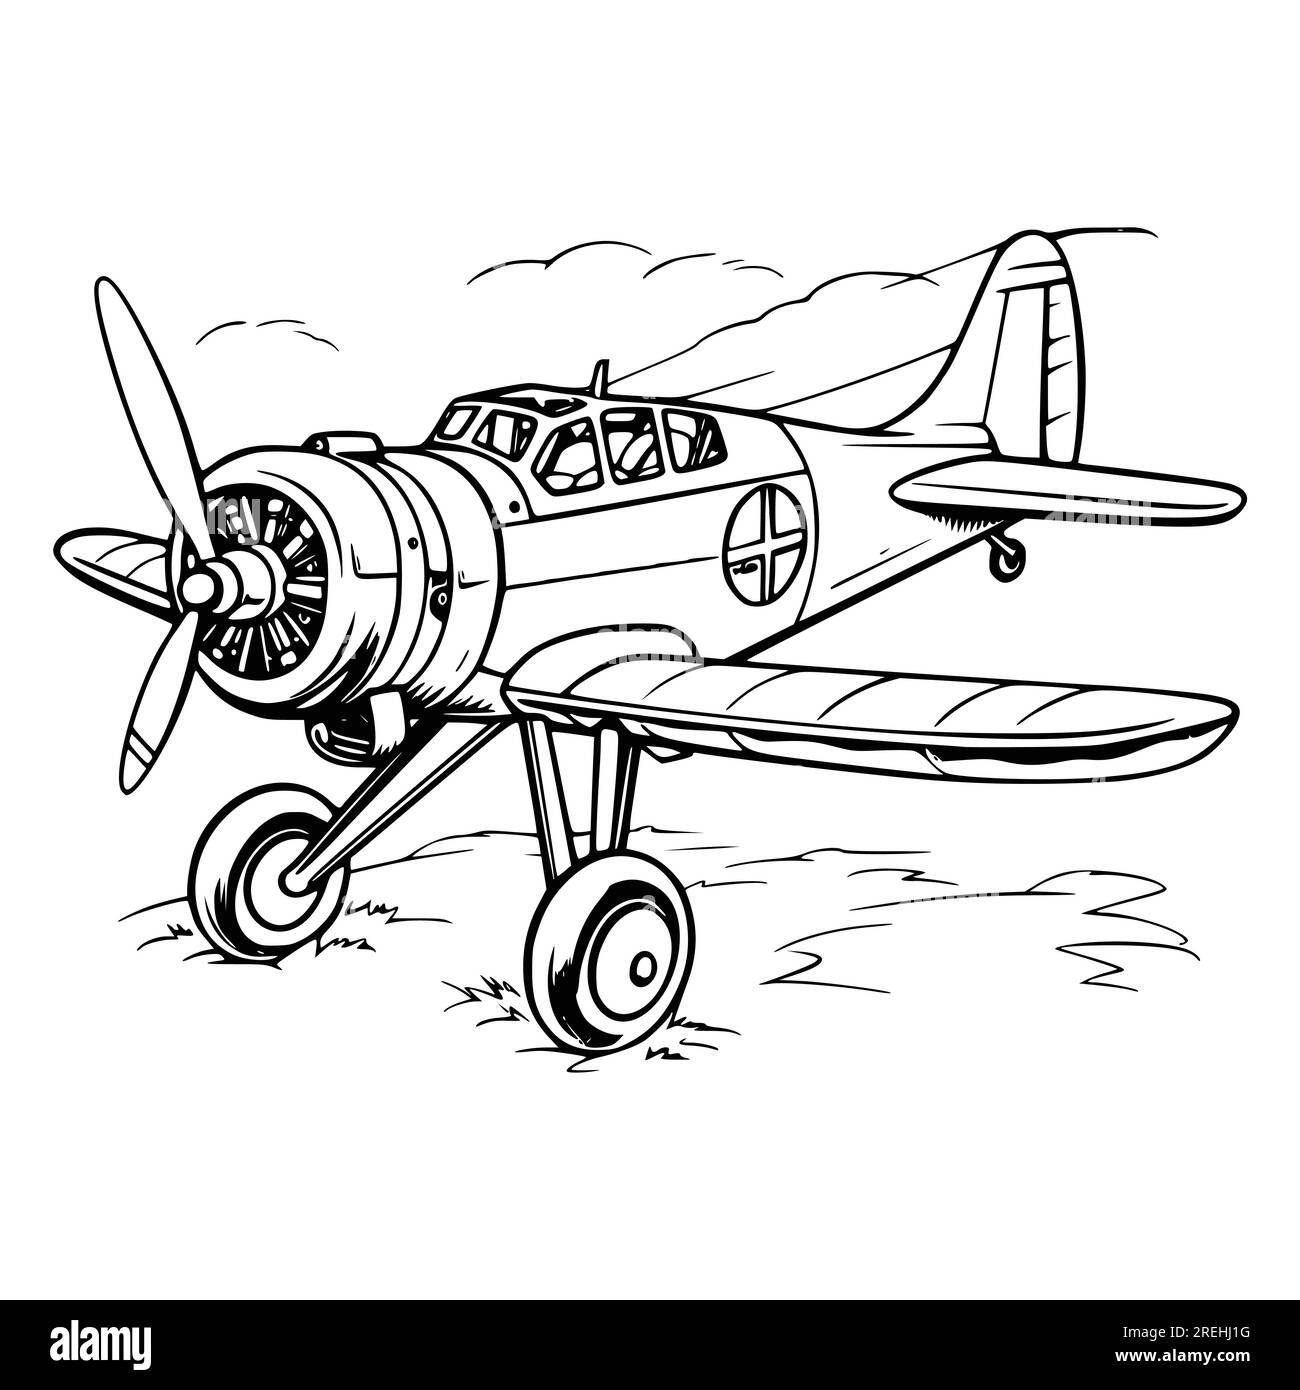 Plane coloring pages drawing for kids stock vector image art